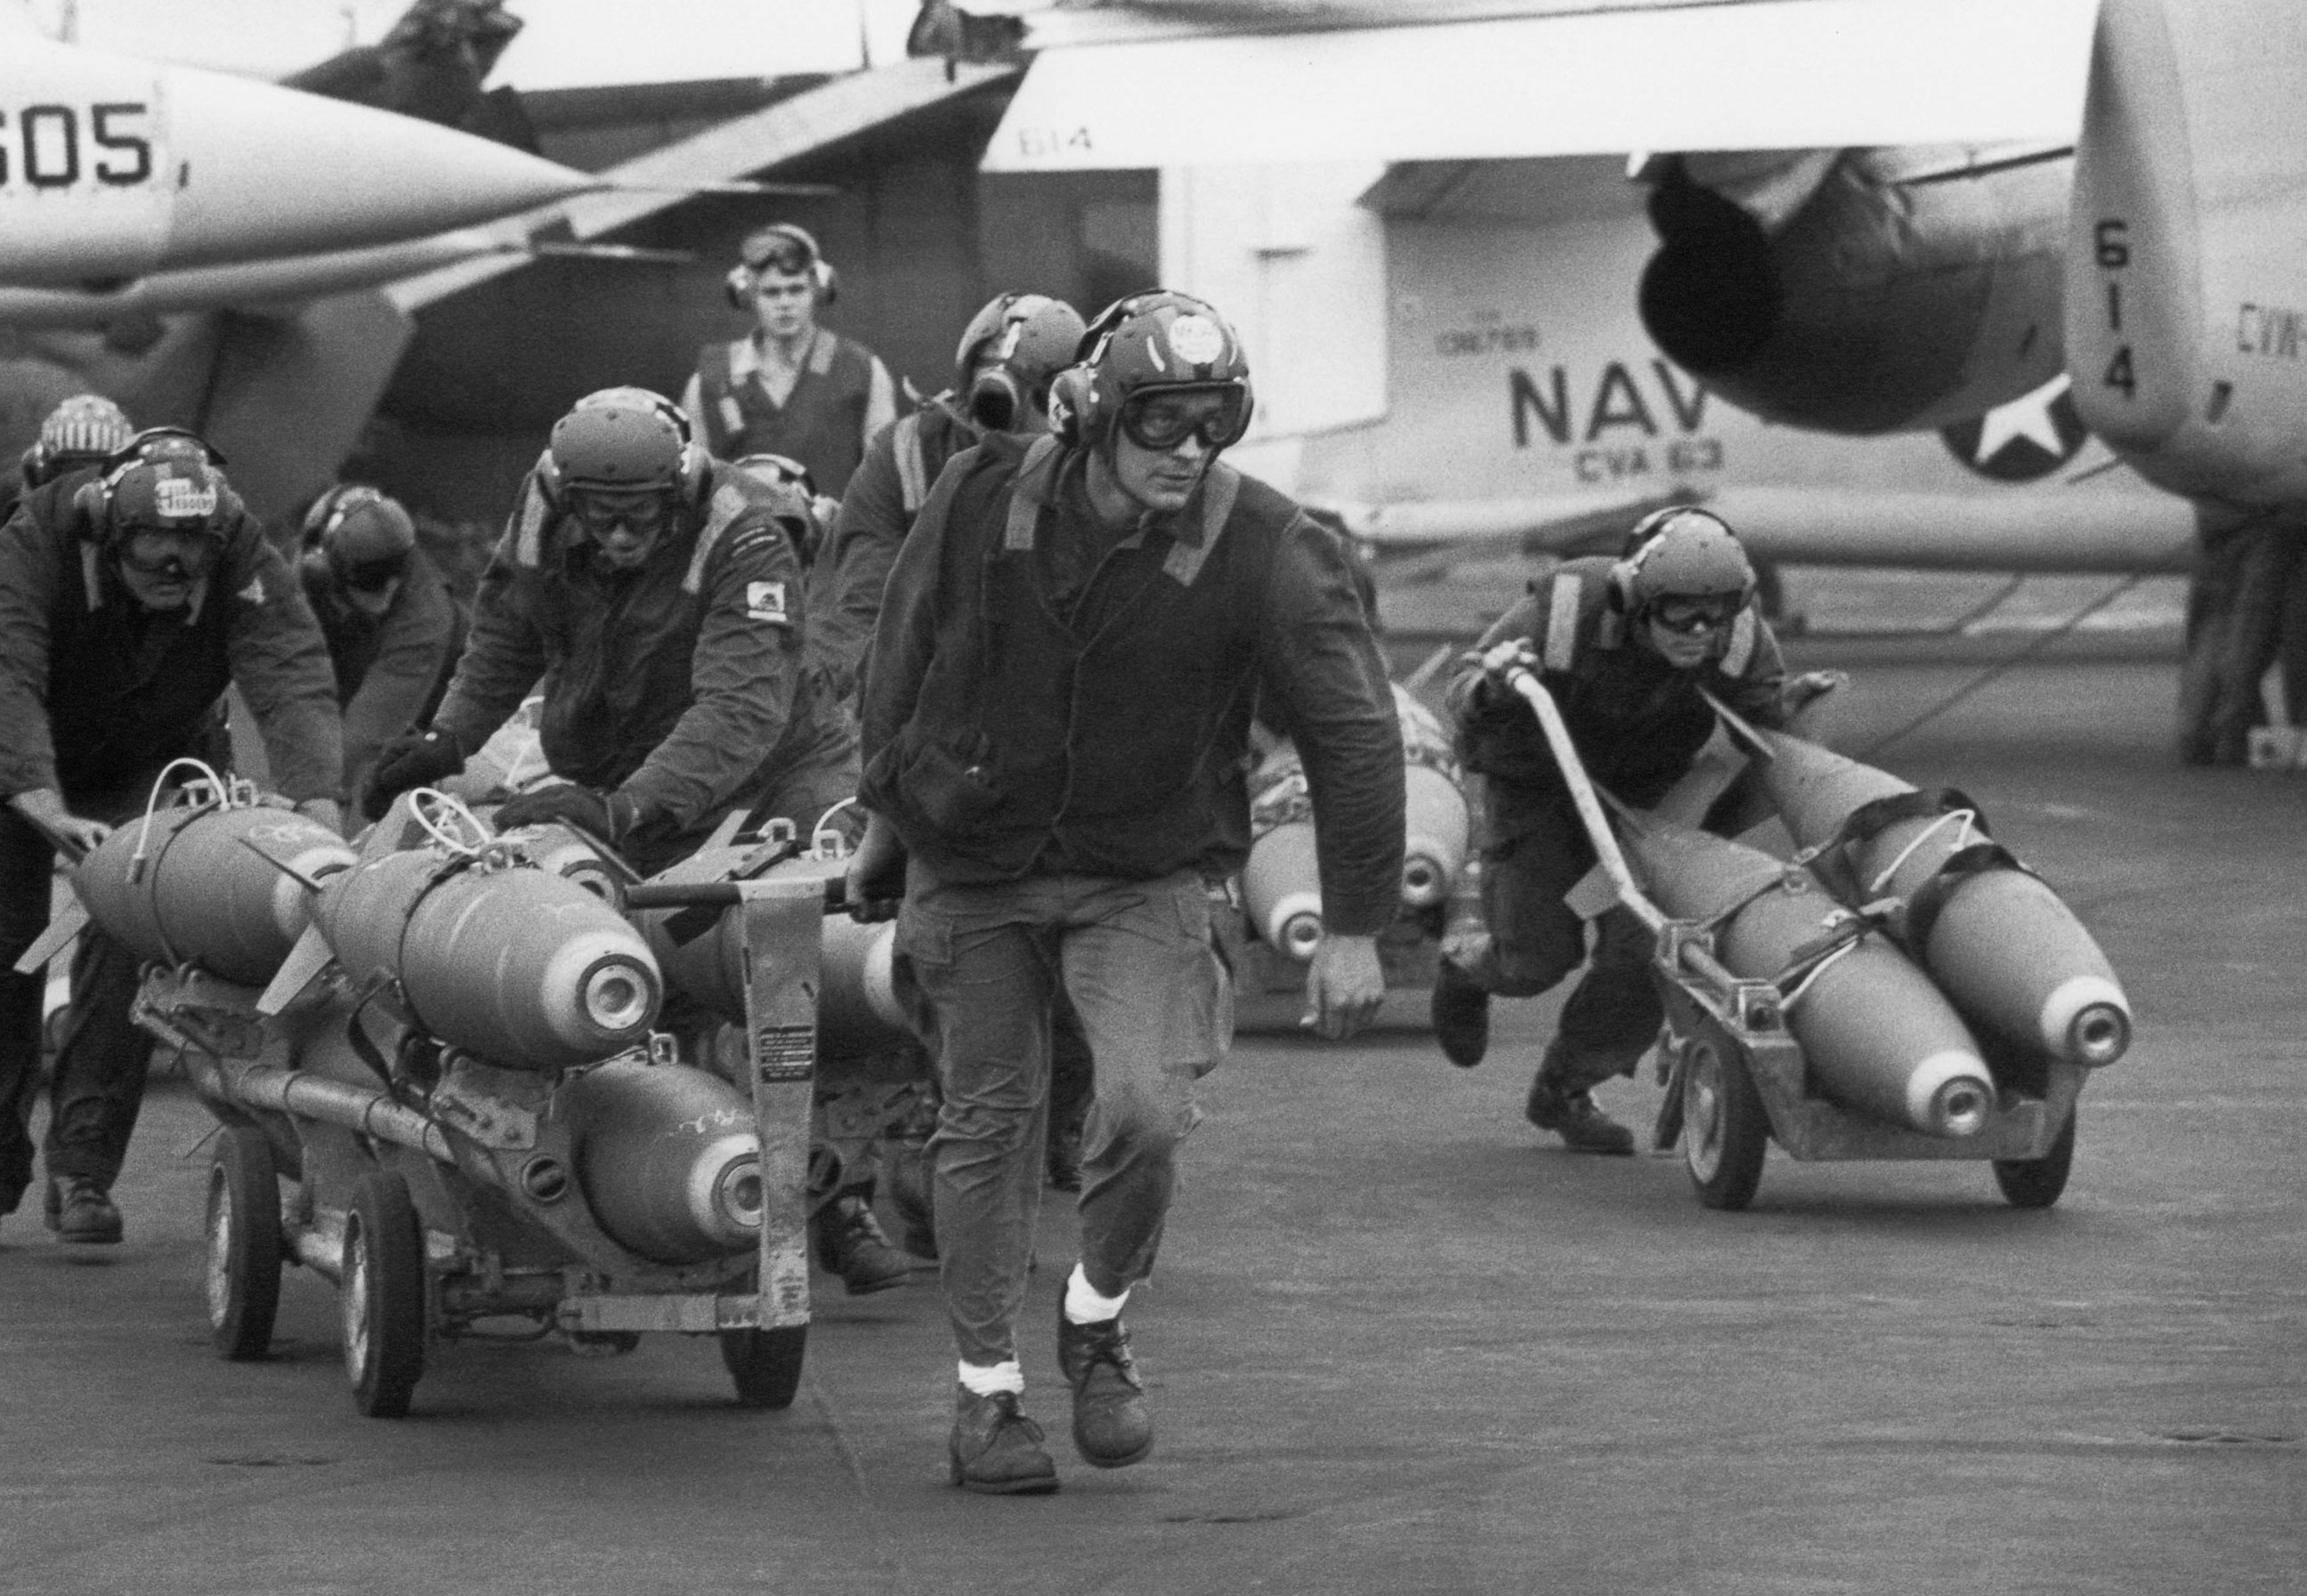 PHOTO: U.S. Navy armorers wheel out 500-pound bombs for the wing racks of jets being used in support for South Vietnamese troops fighting the enemy in Laos, on March 18, 1971. 